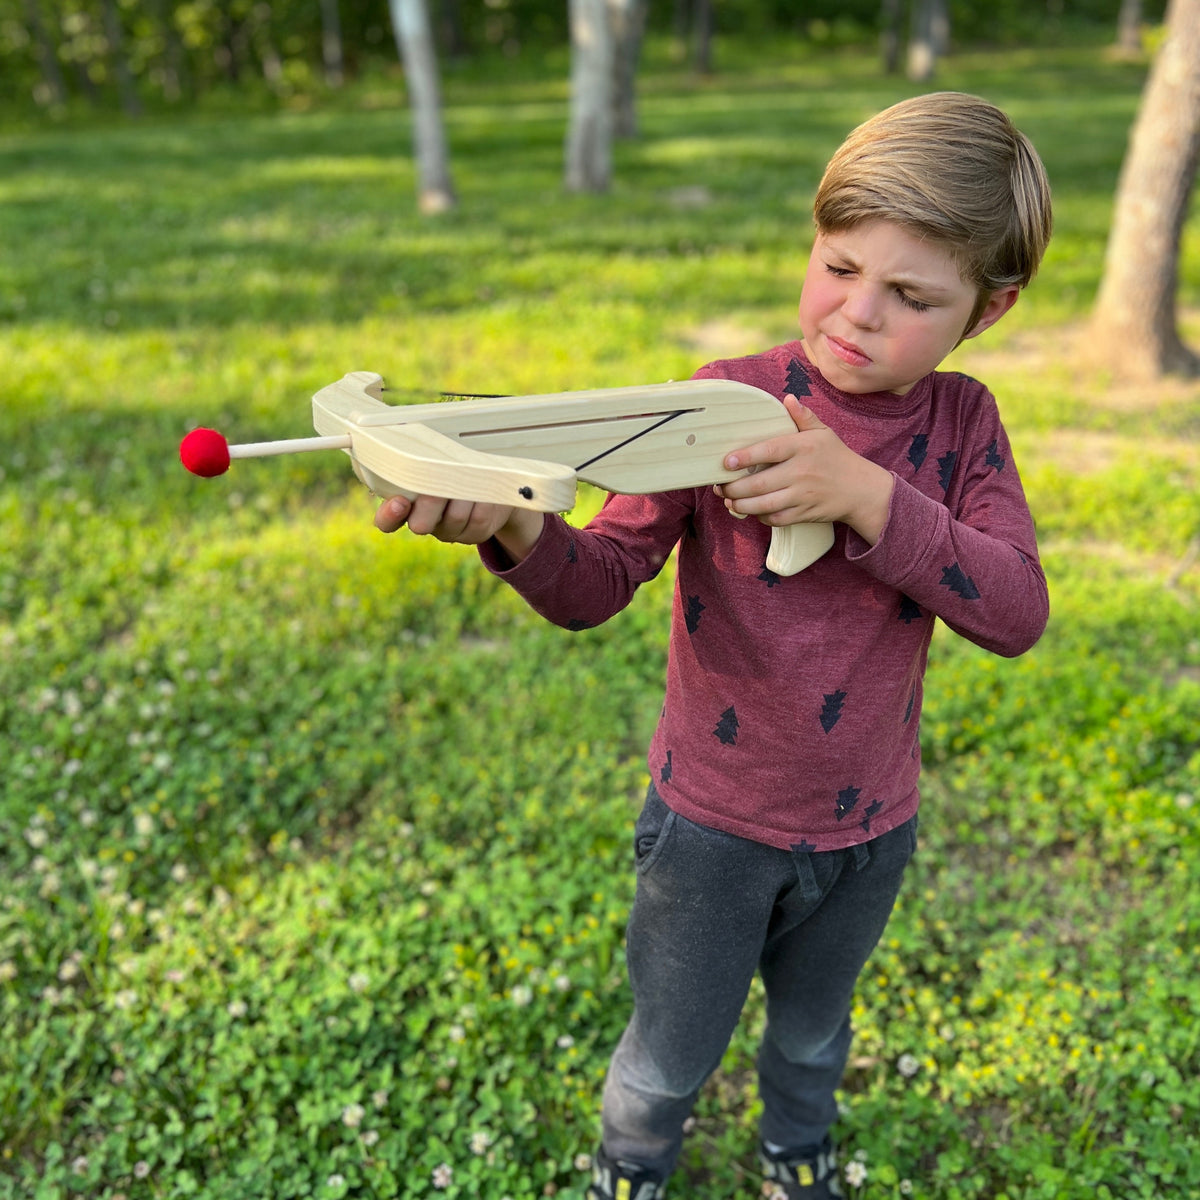 TO BE DISCONTINUED: Wooden Toy Crossbow